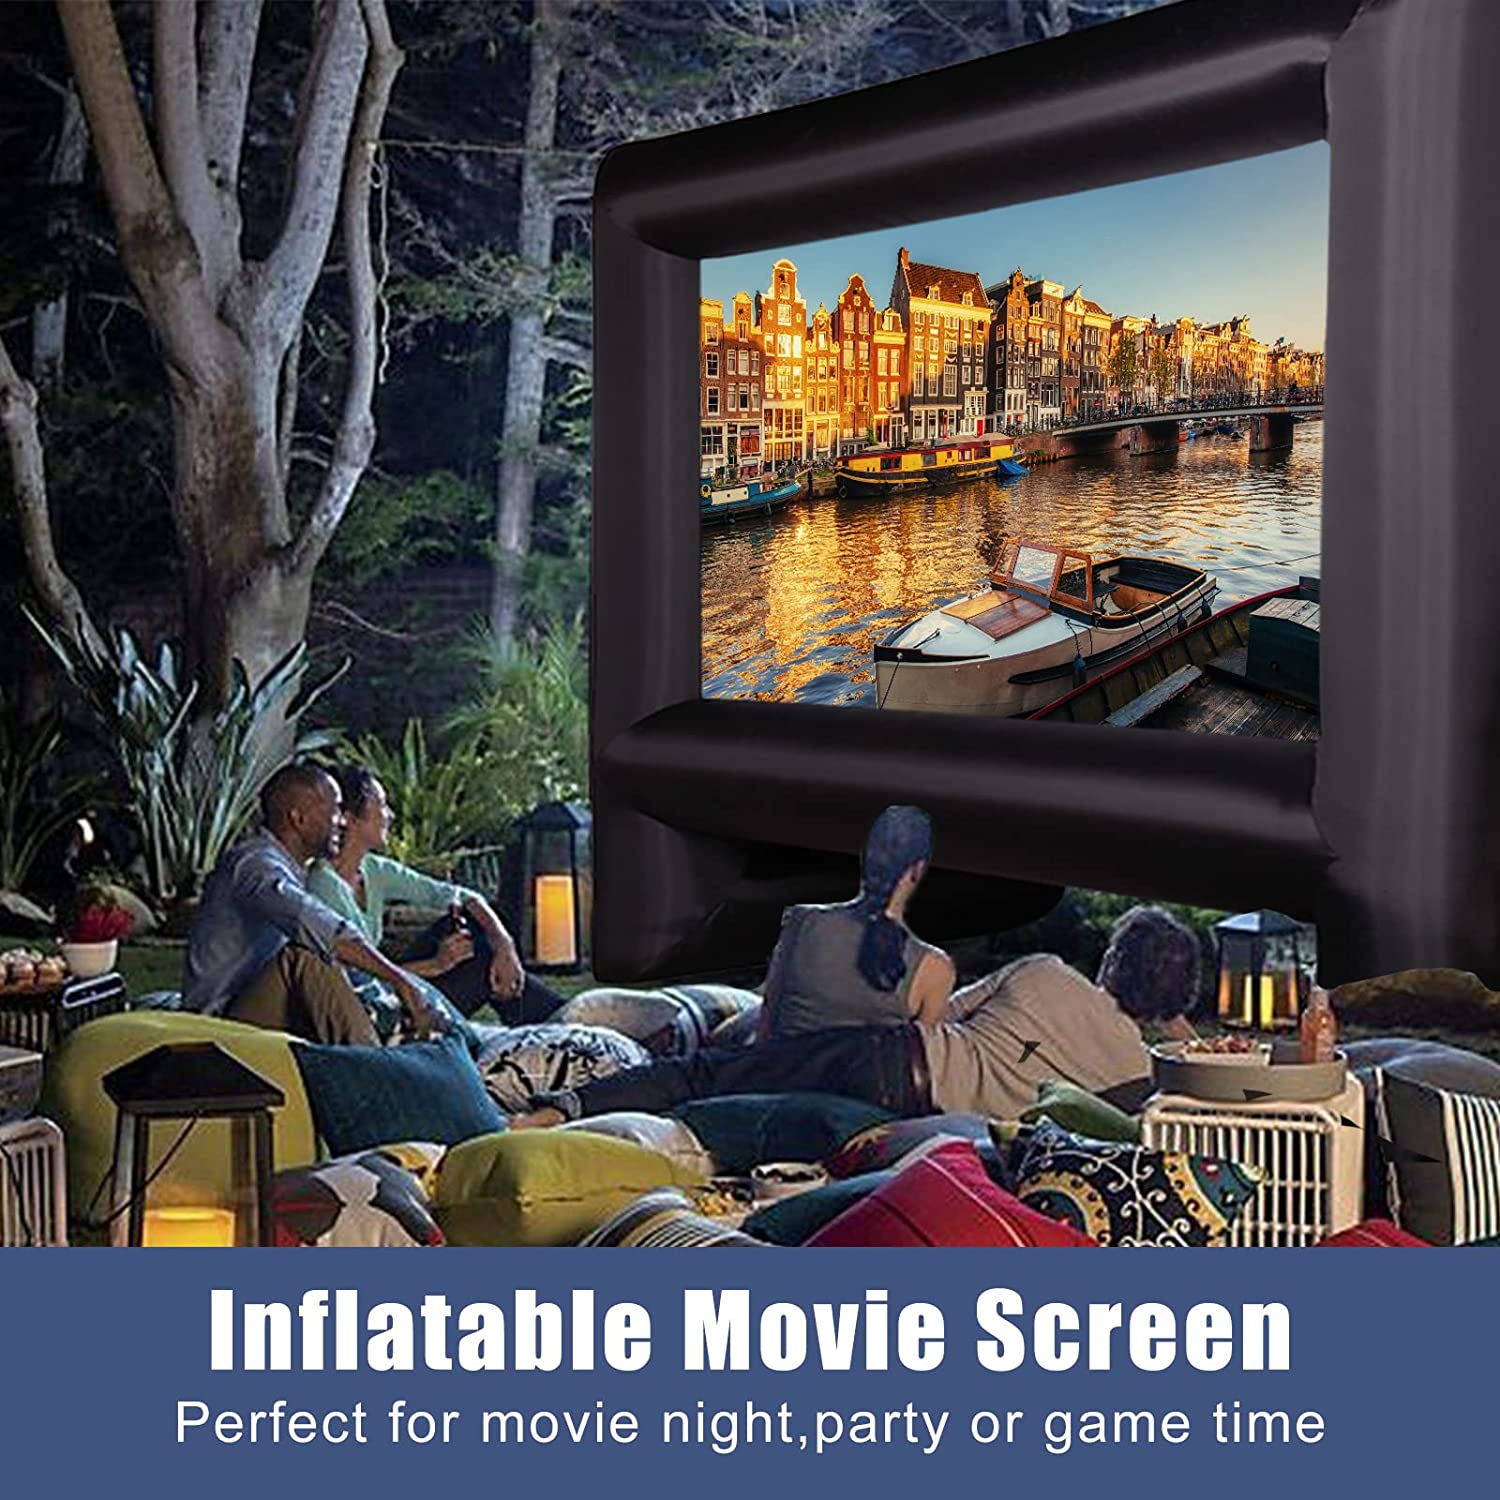 People are outdoors watching a program on a giant inflatable movie screen. There is text which says, "Inflatable movie screen. Perfect for movie night, party or game time."